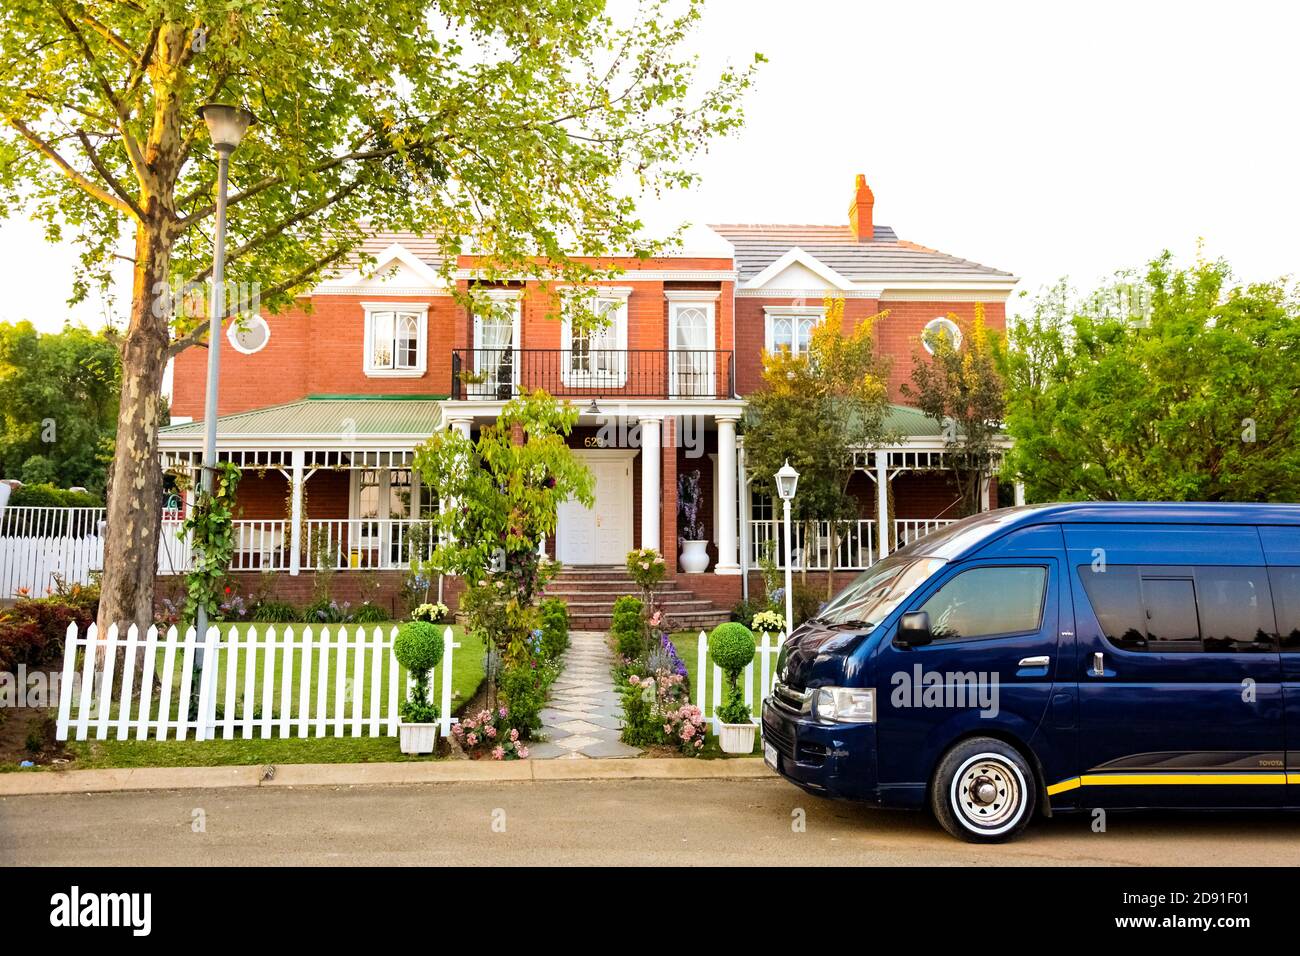 Johannesburg, South Africa - September 10, 2010: Minibus taxi van parked outside a house in a wealthy neighborhood Stock Photo